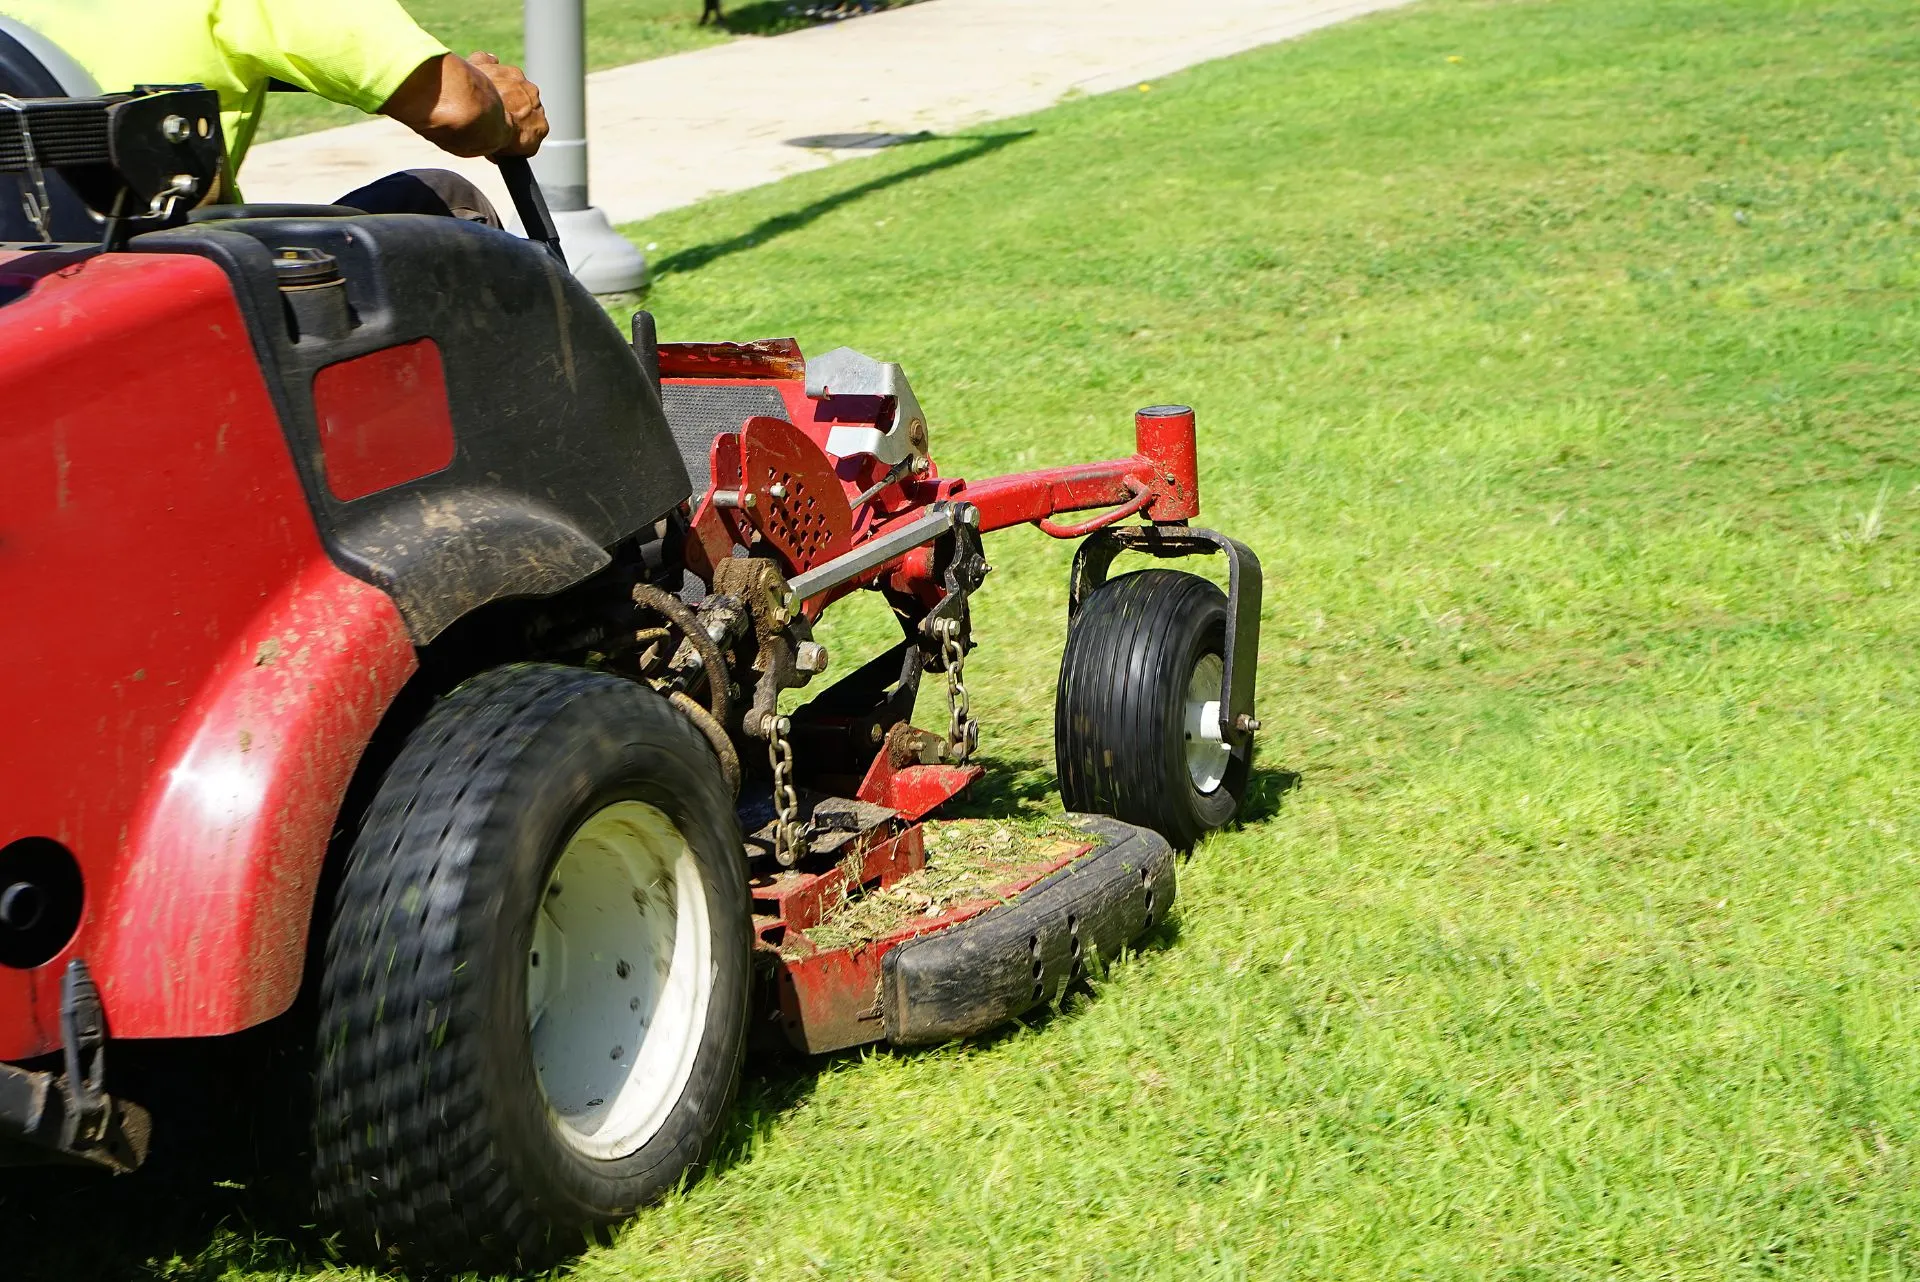 How To Change Hydraulic Fluid on Zero Turn Mower featured image